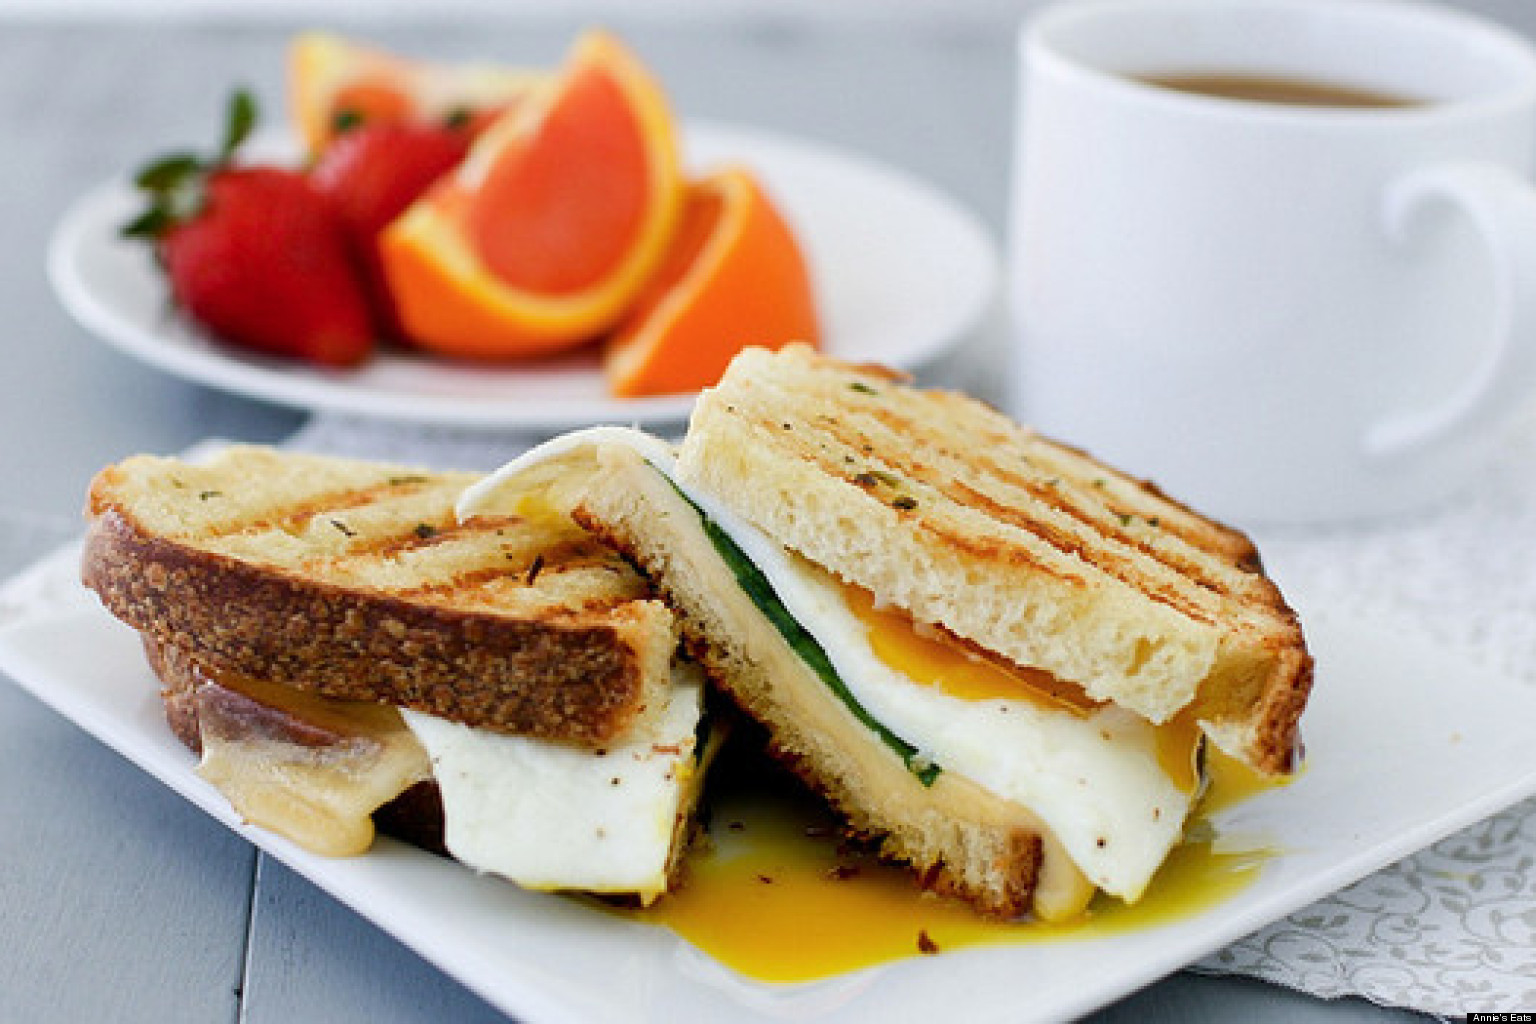 Breakfast Recipes Made In Just 15 Minutes (PHOTOS)